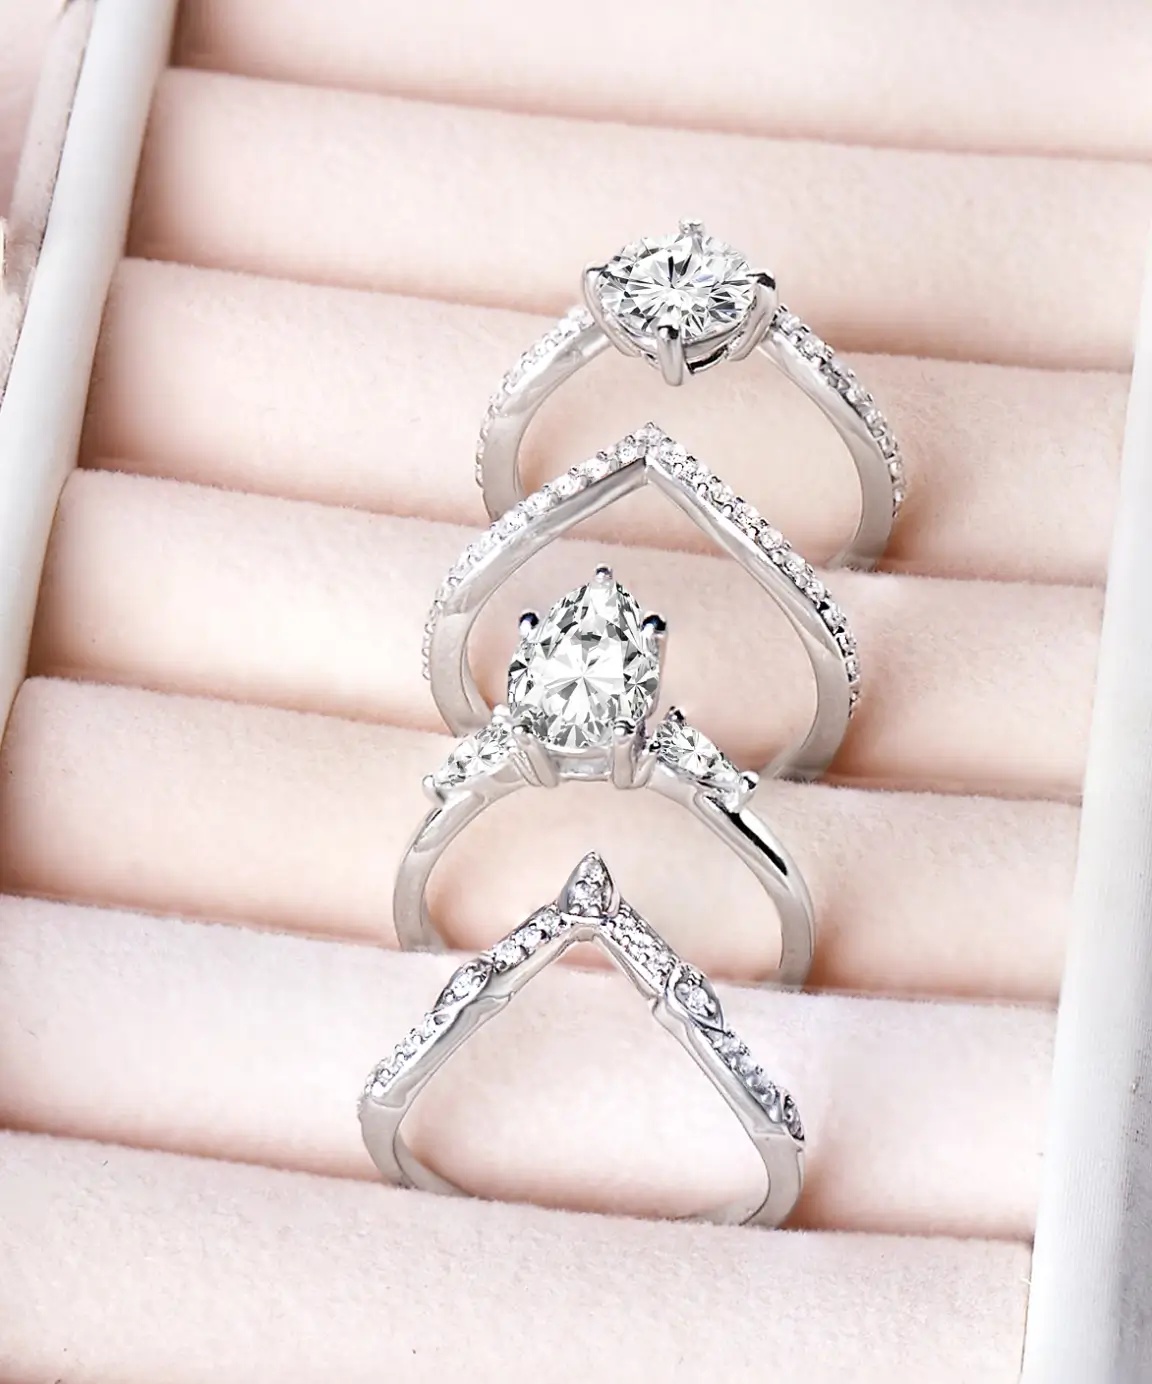 Antique Style Engagement Rings: A Timeless Expression of Love